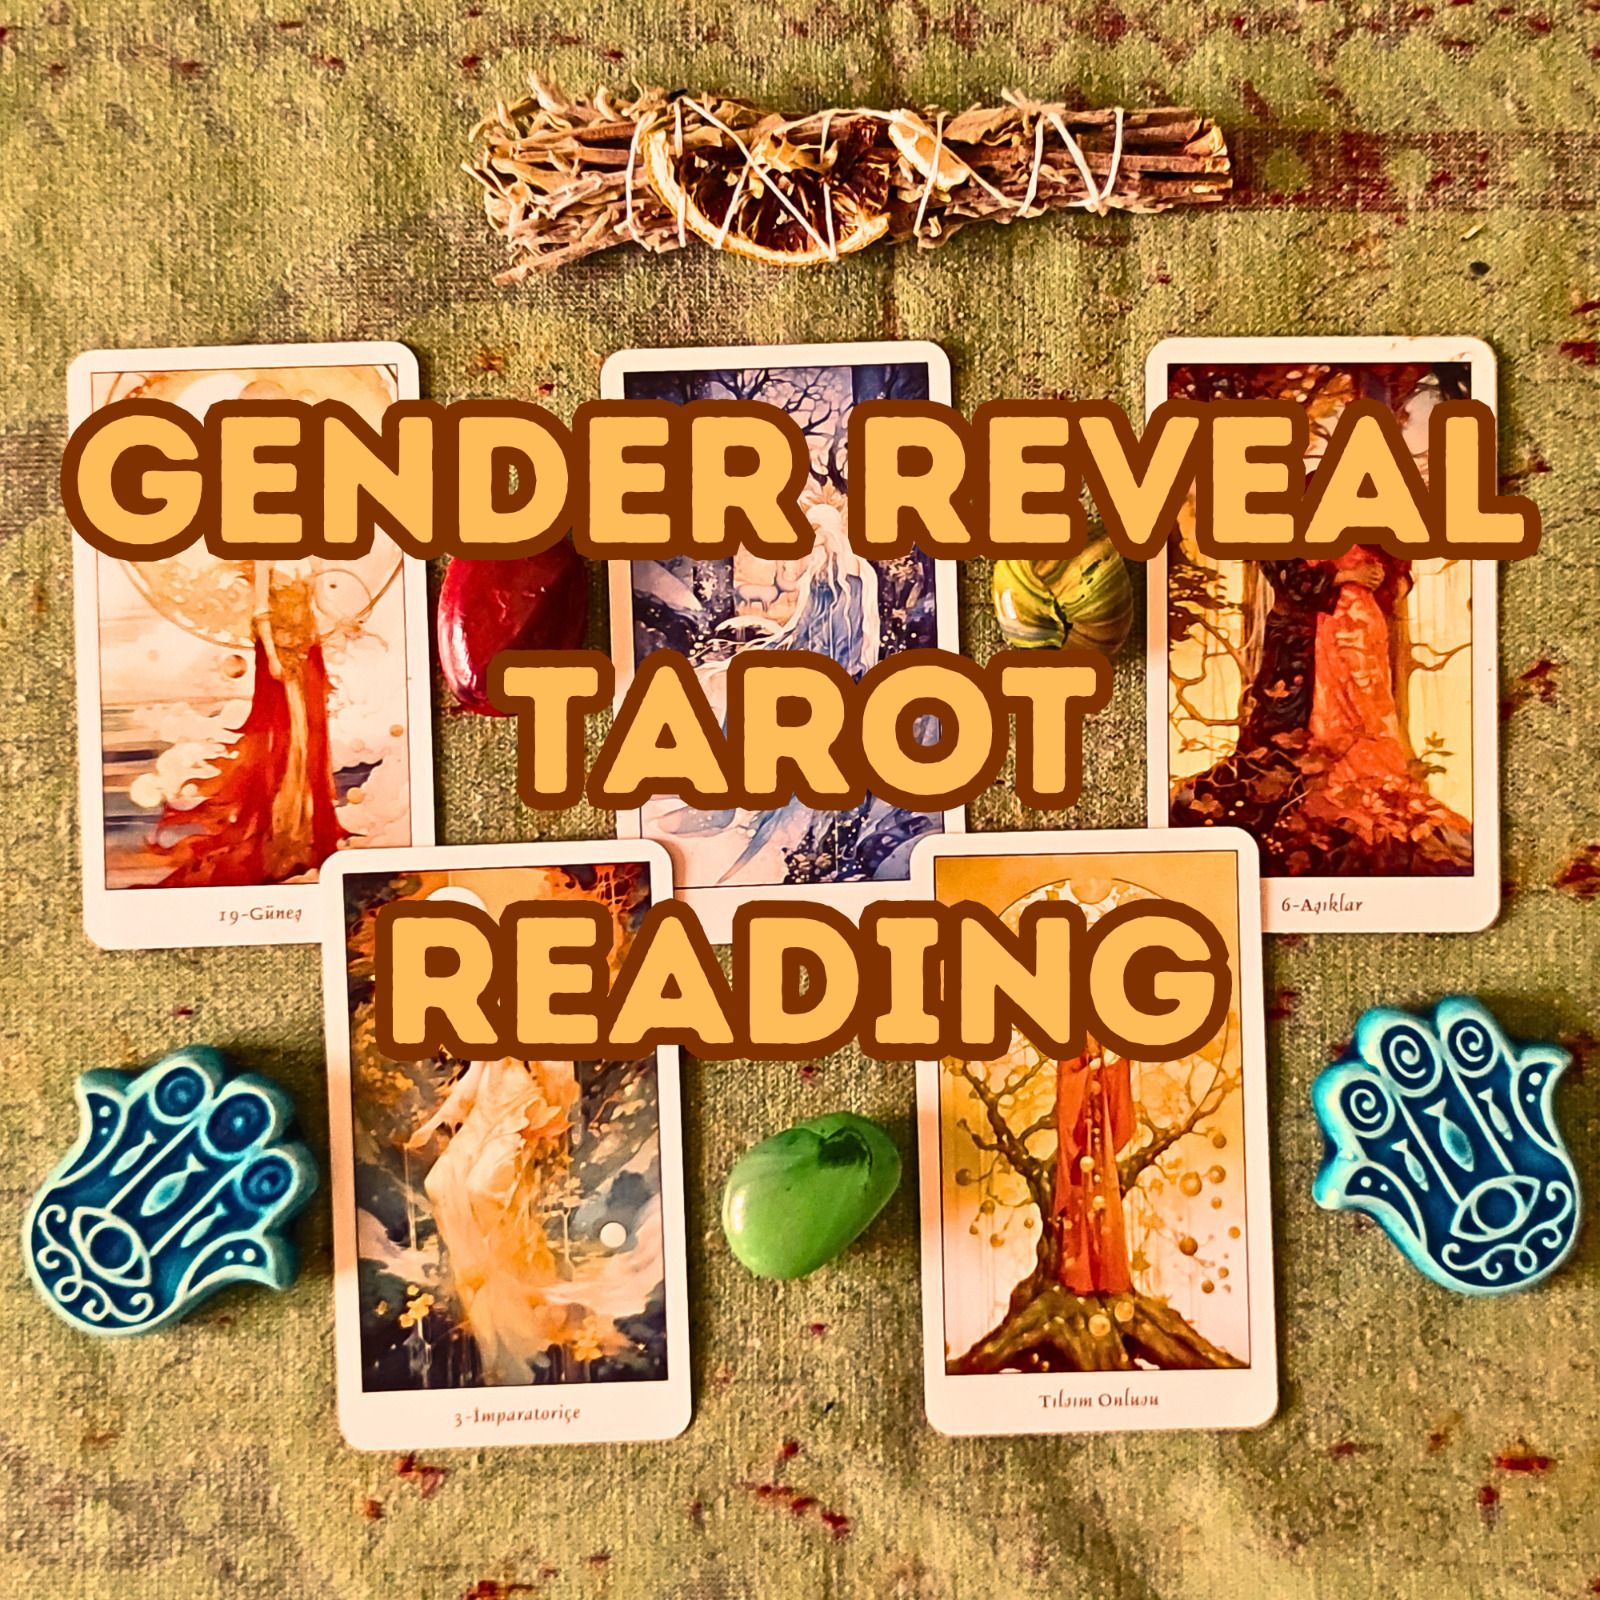 Gender Reveal Tarot Reading and Psychic Pendulum,S ame Day, Girl or Boy